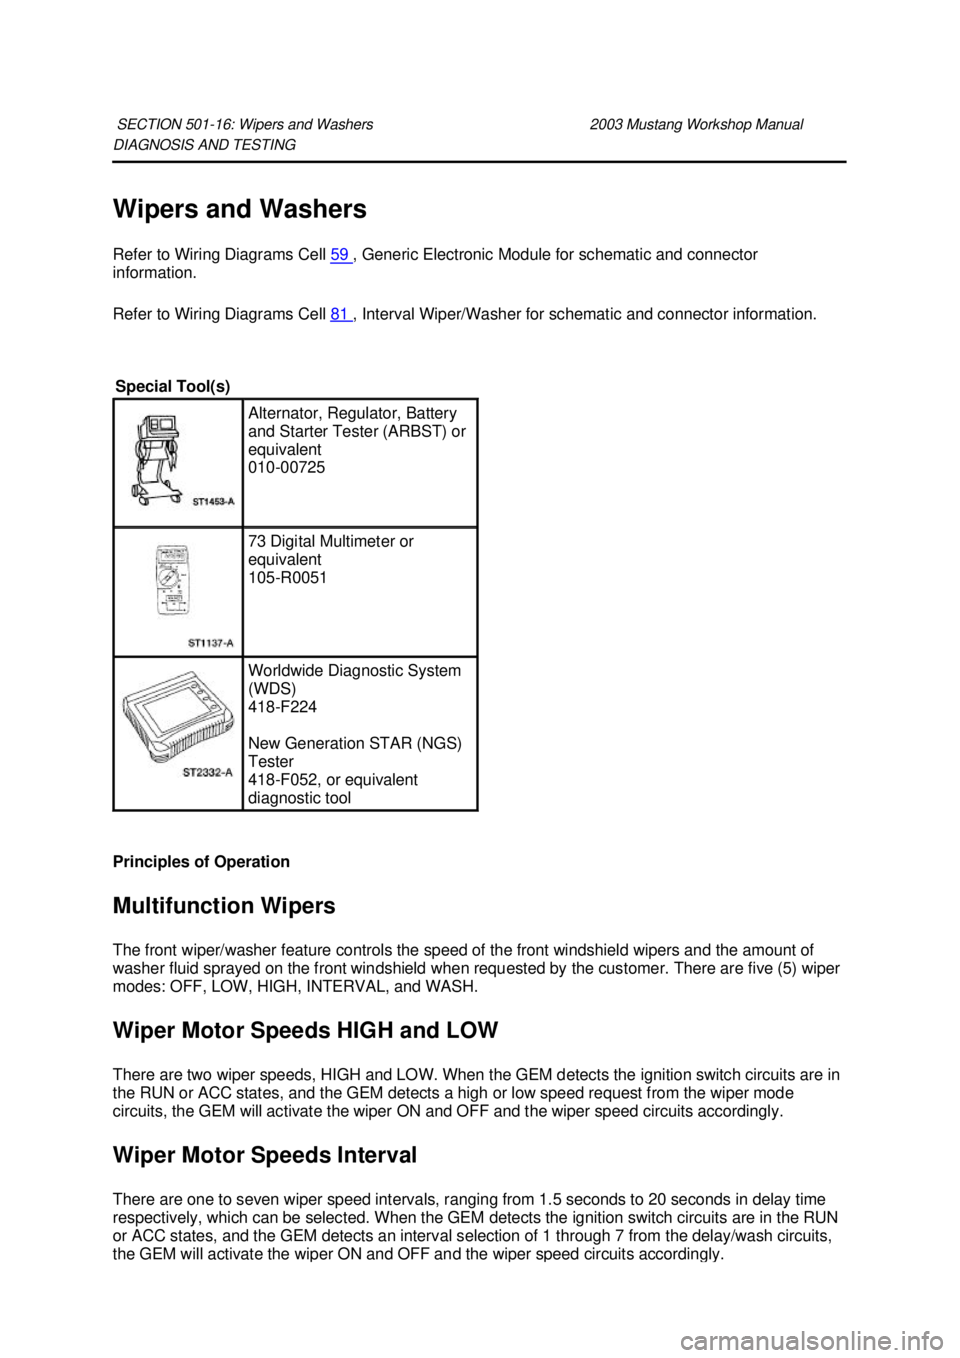 FORD MUSTANG 2003  Workshop Manual DIAGNOSIS AND TESTING 
Wipers and Washers 
Refer to Wiring Diagrams Cell 
59  , Generic Electronic Module for schematic and connector 
information. 
Refer to Wiring Diagrams Cell  81  , Interval Wiper